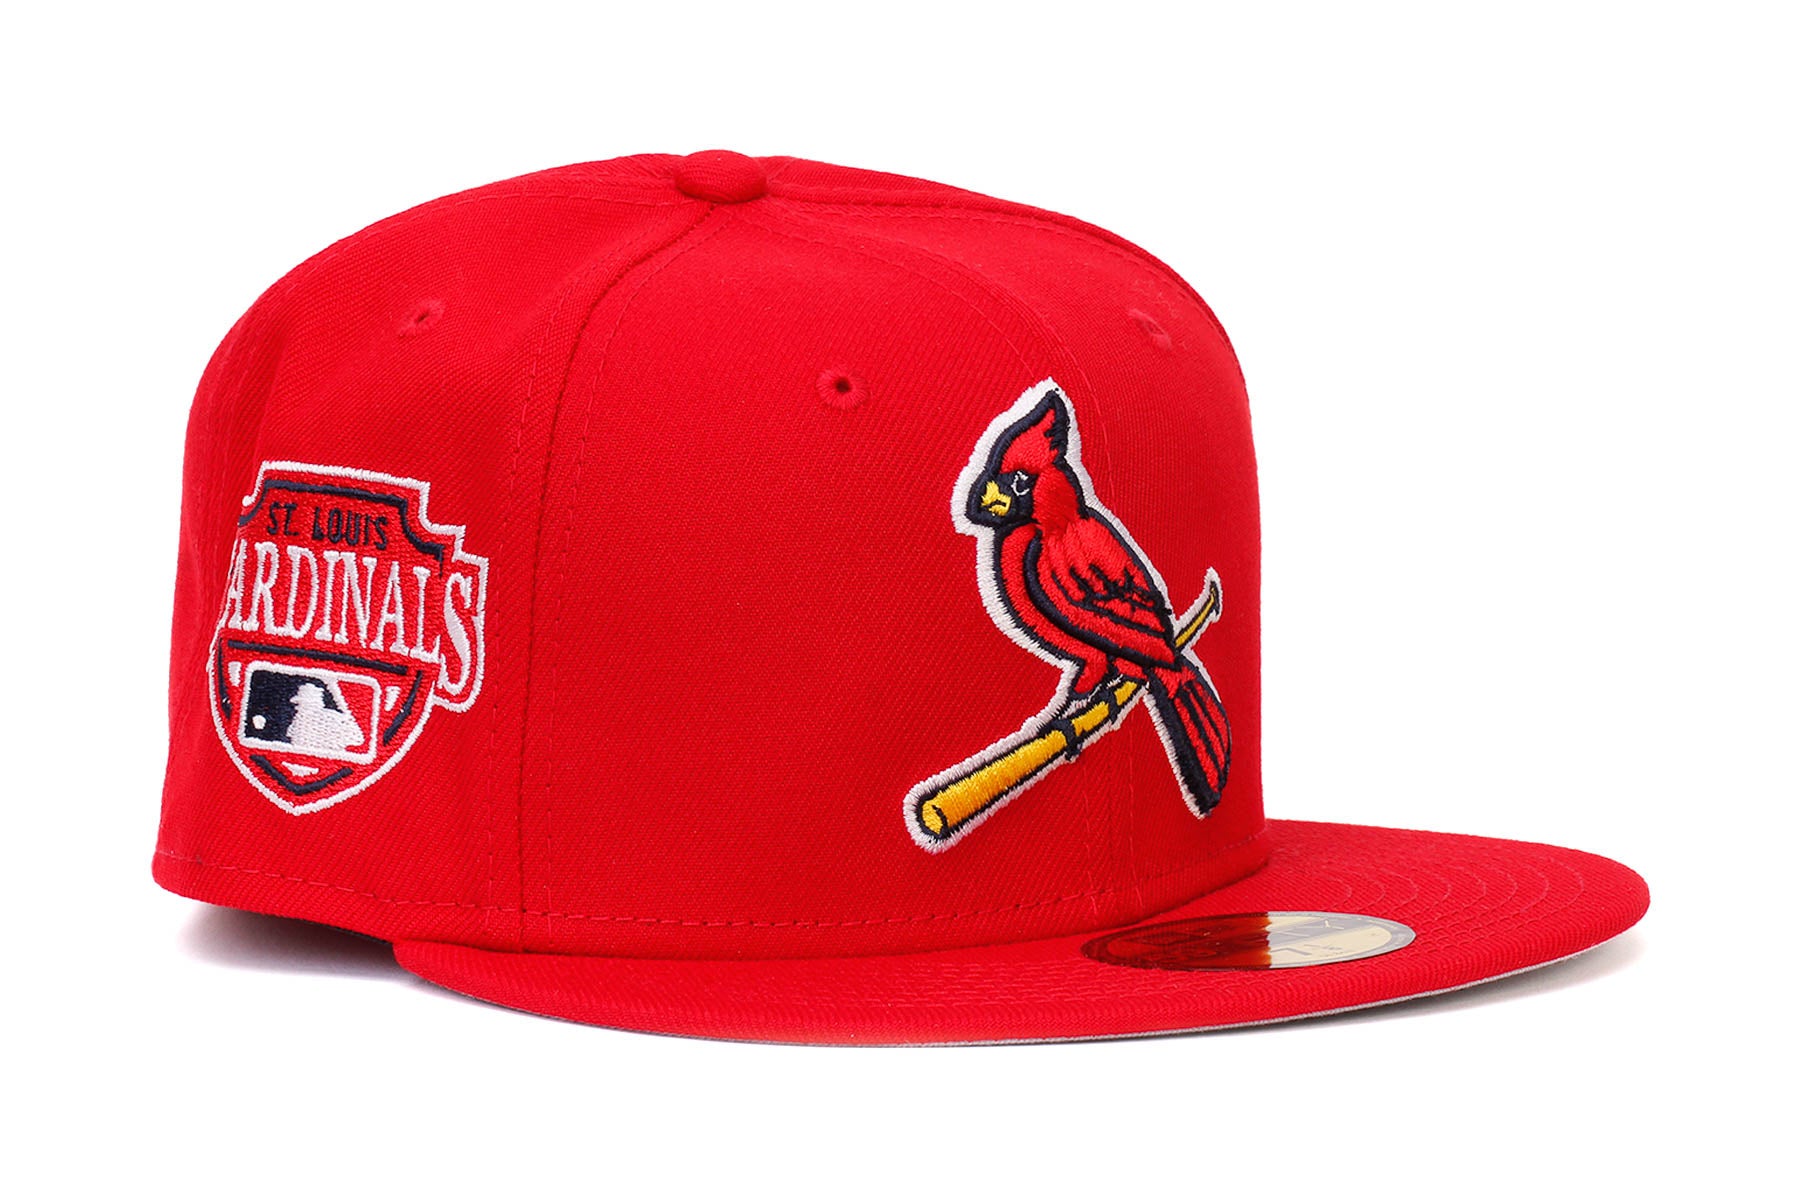 St. Louis Cardinals New Era 5950 Fitted Hat - Alt 2 - Navy/Red